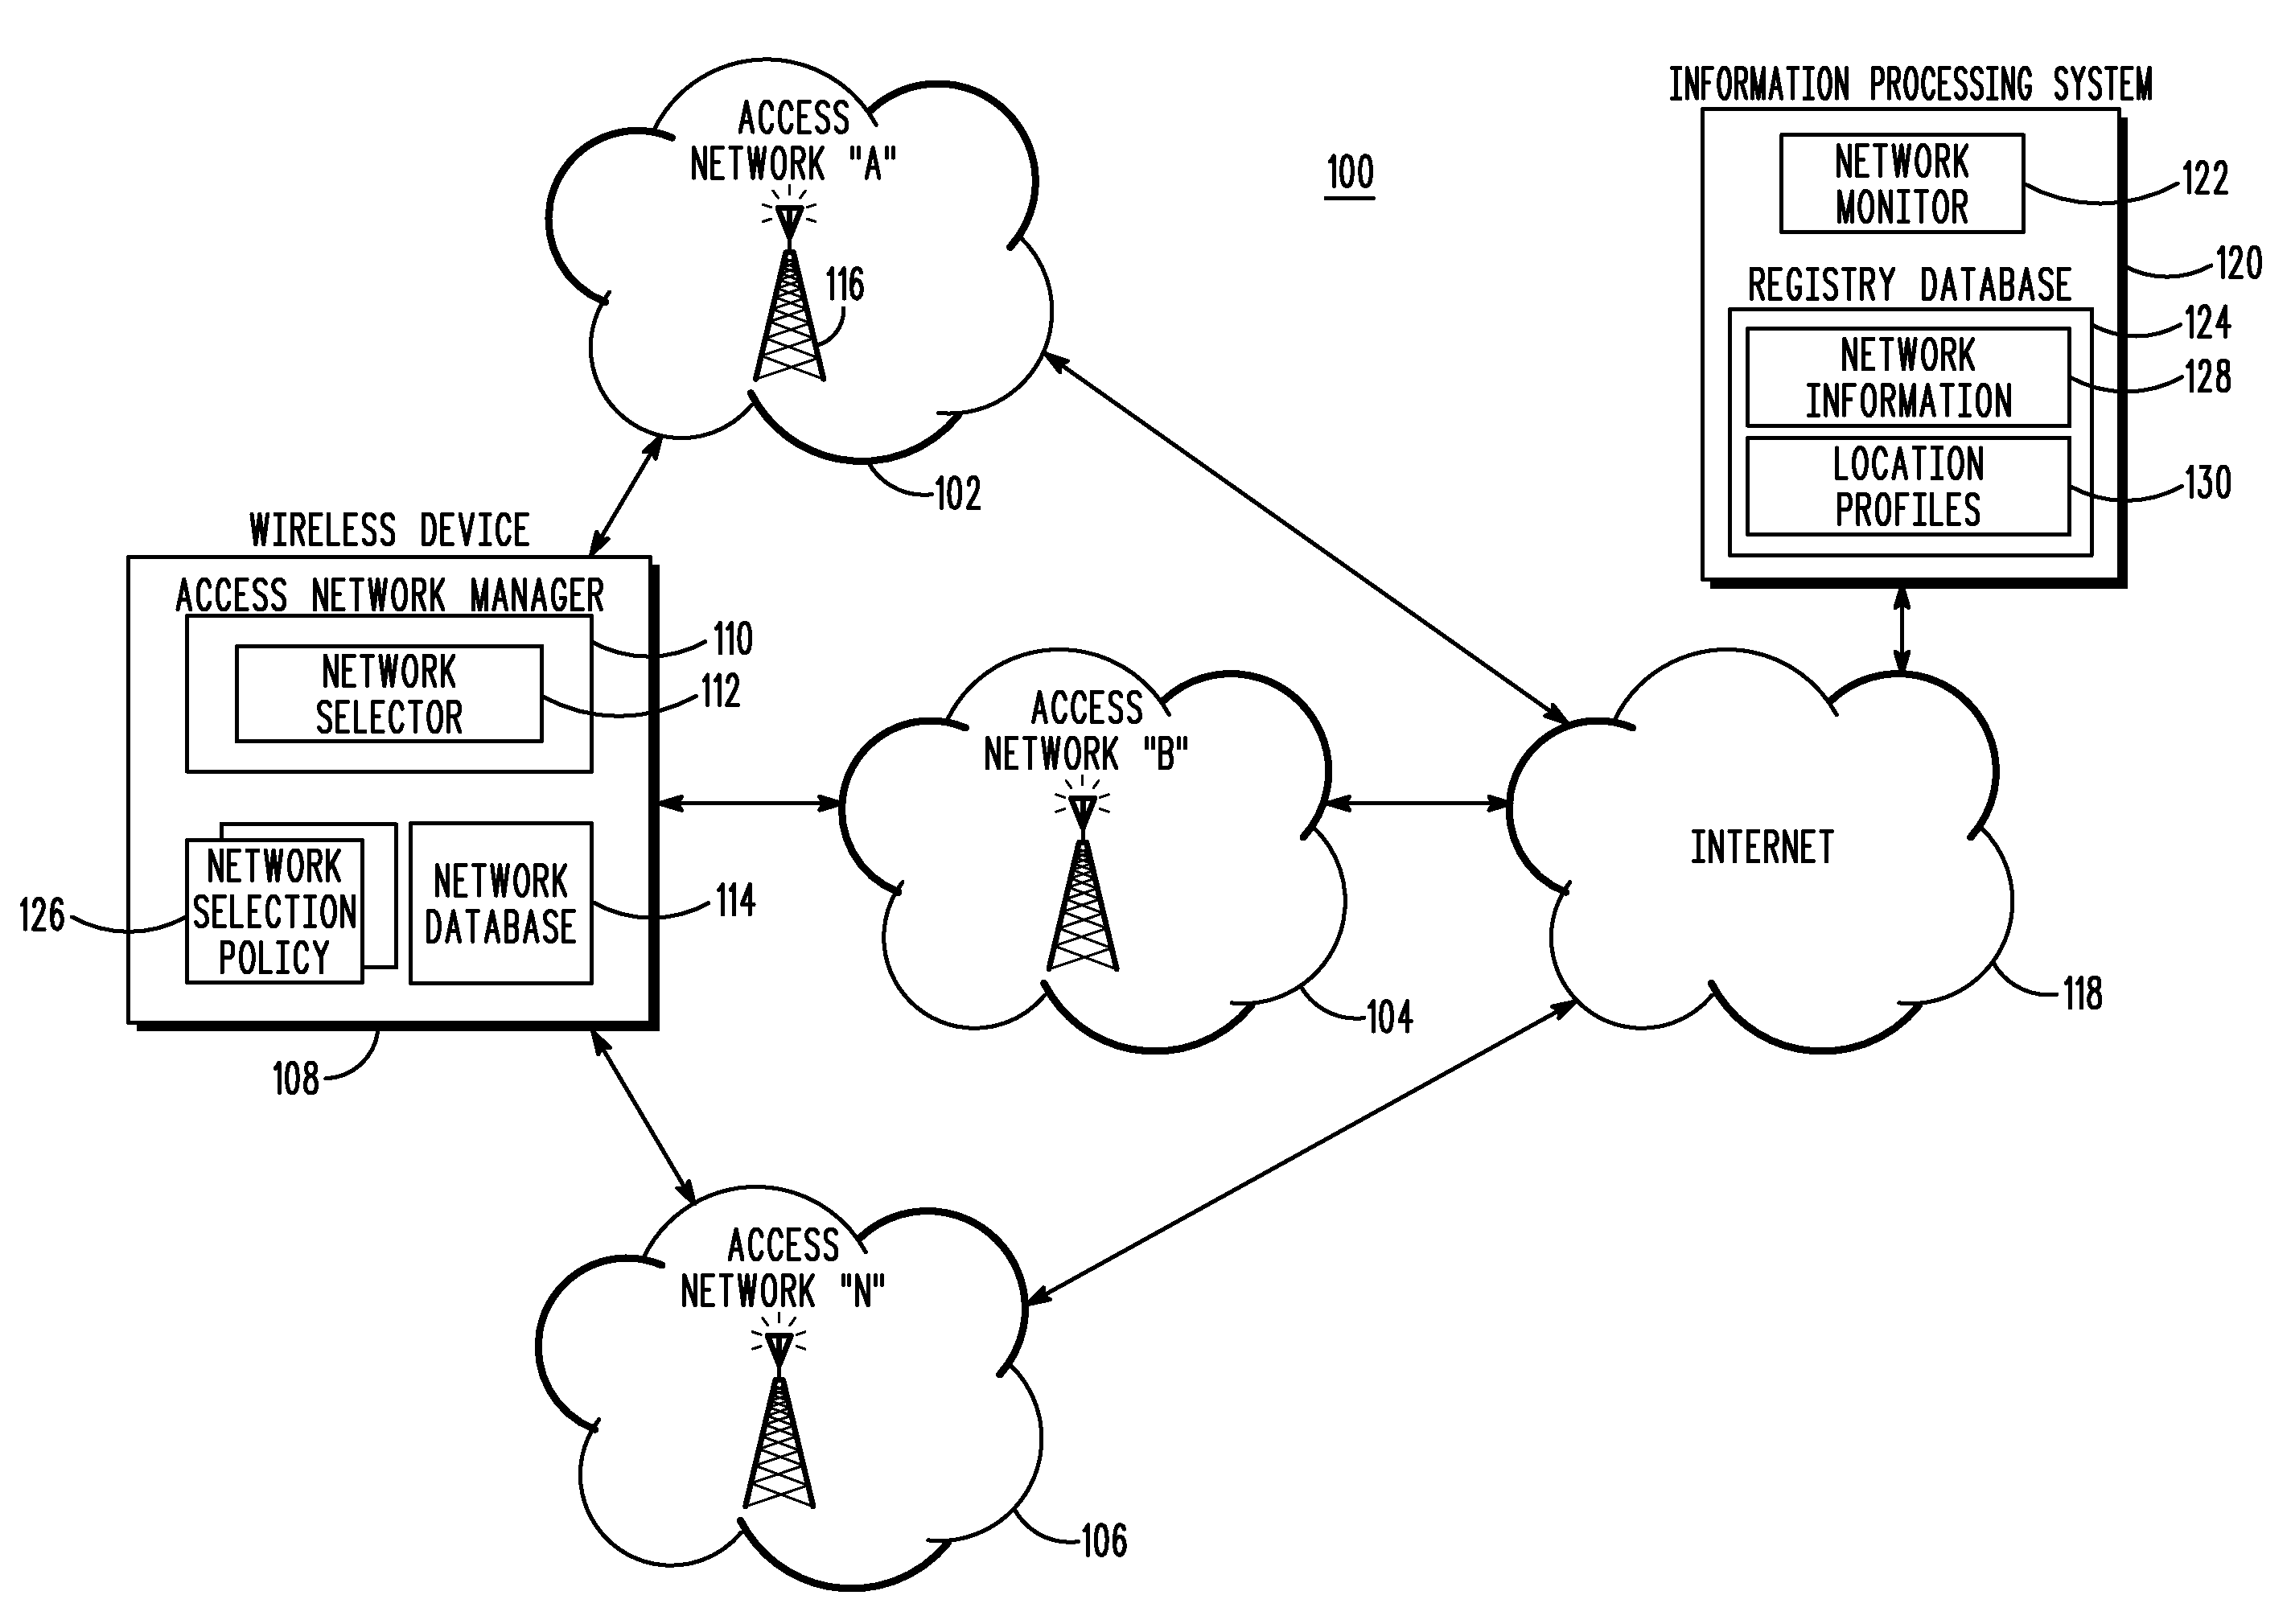 Dynamic network selection by a wireless device